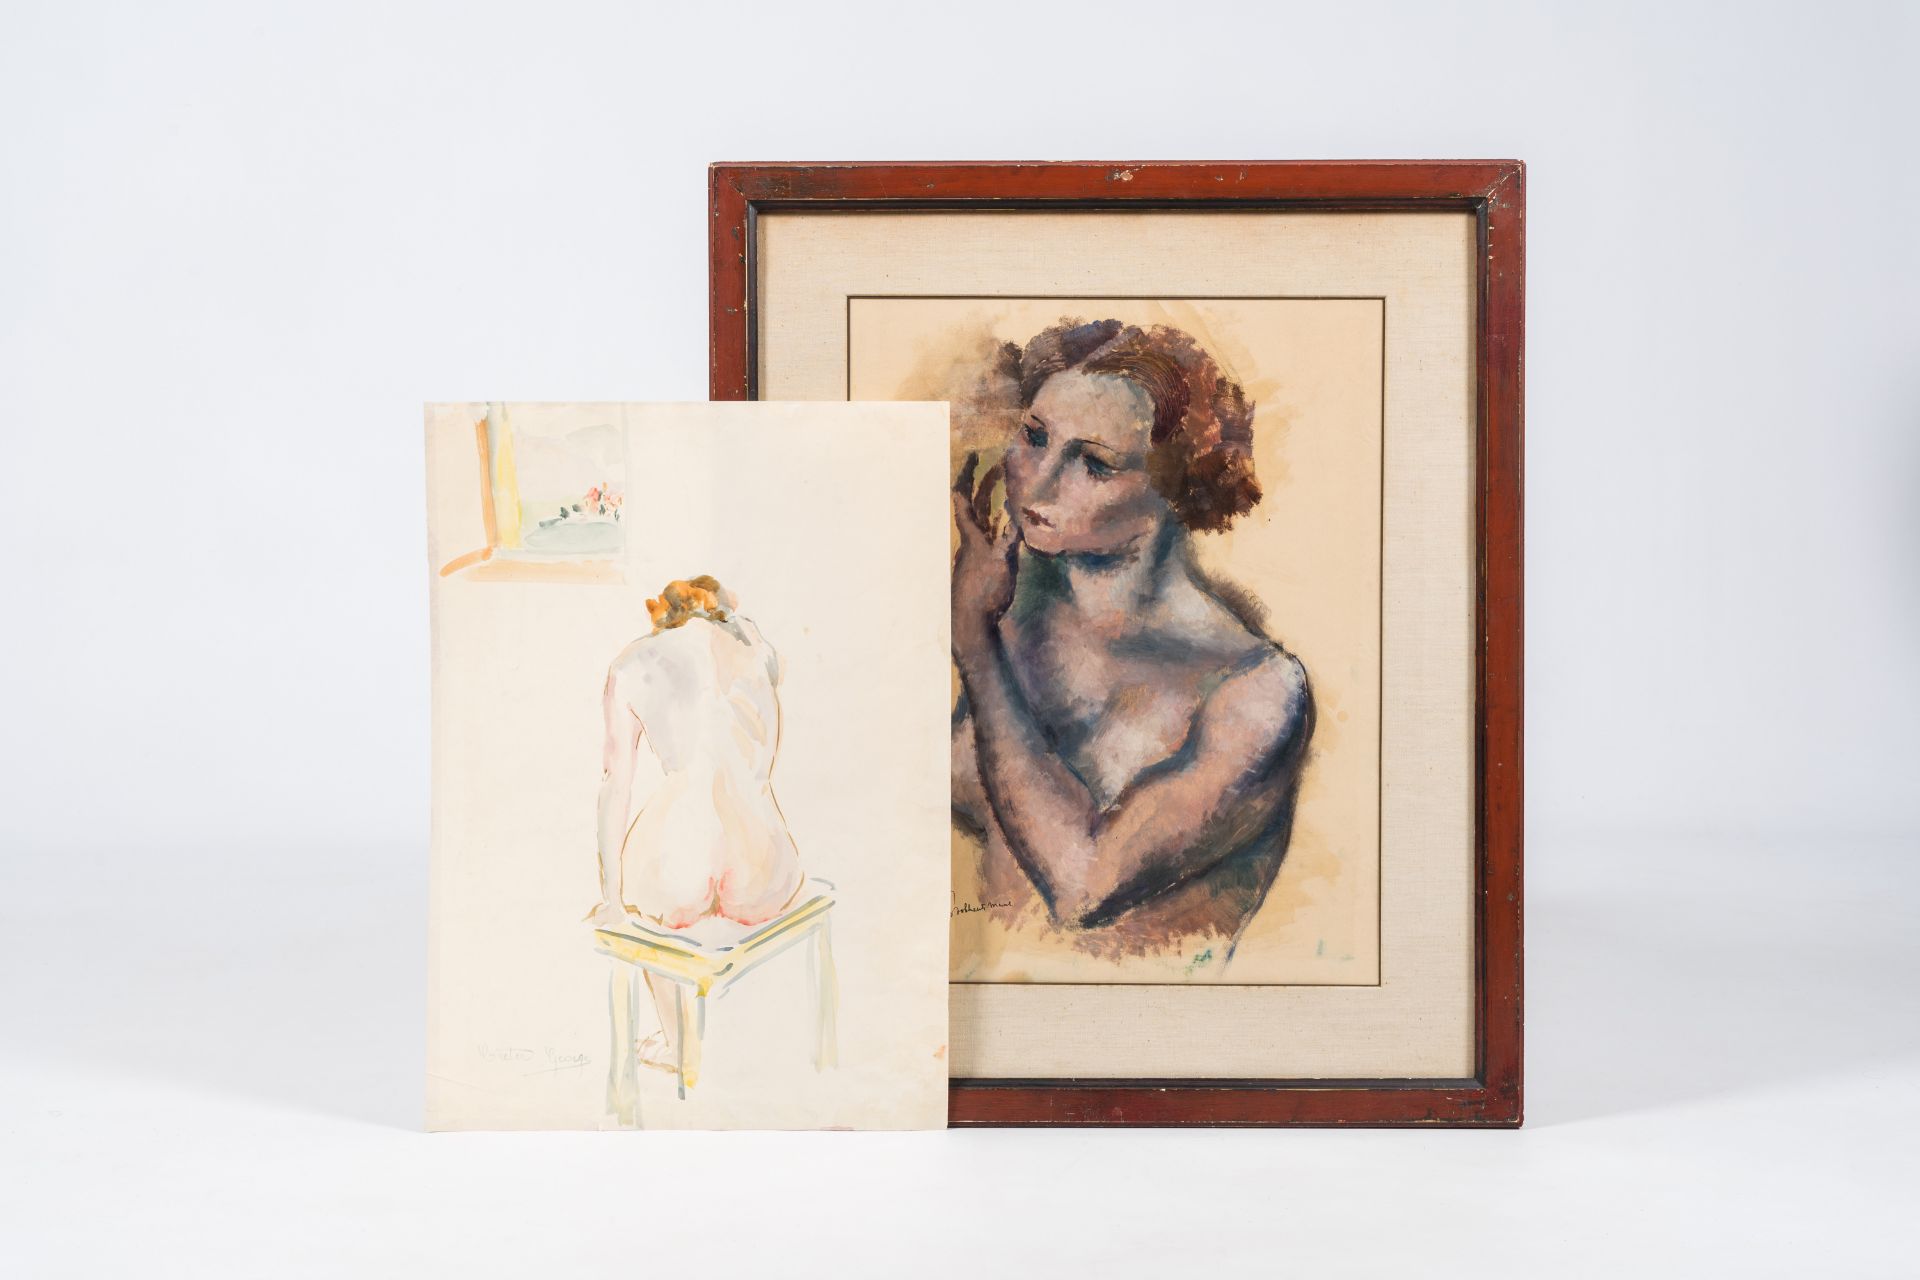 Marcel Stobbaerts (1899-1979) and Georges Creten (1887-1996): Female nude, oil and watercolour on pa